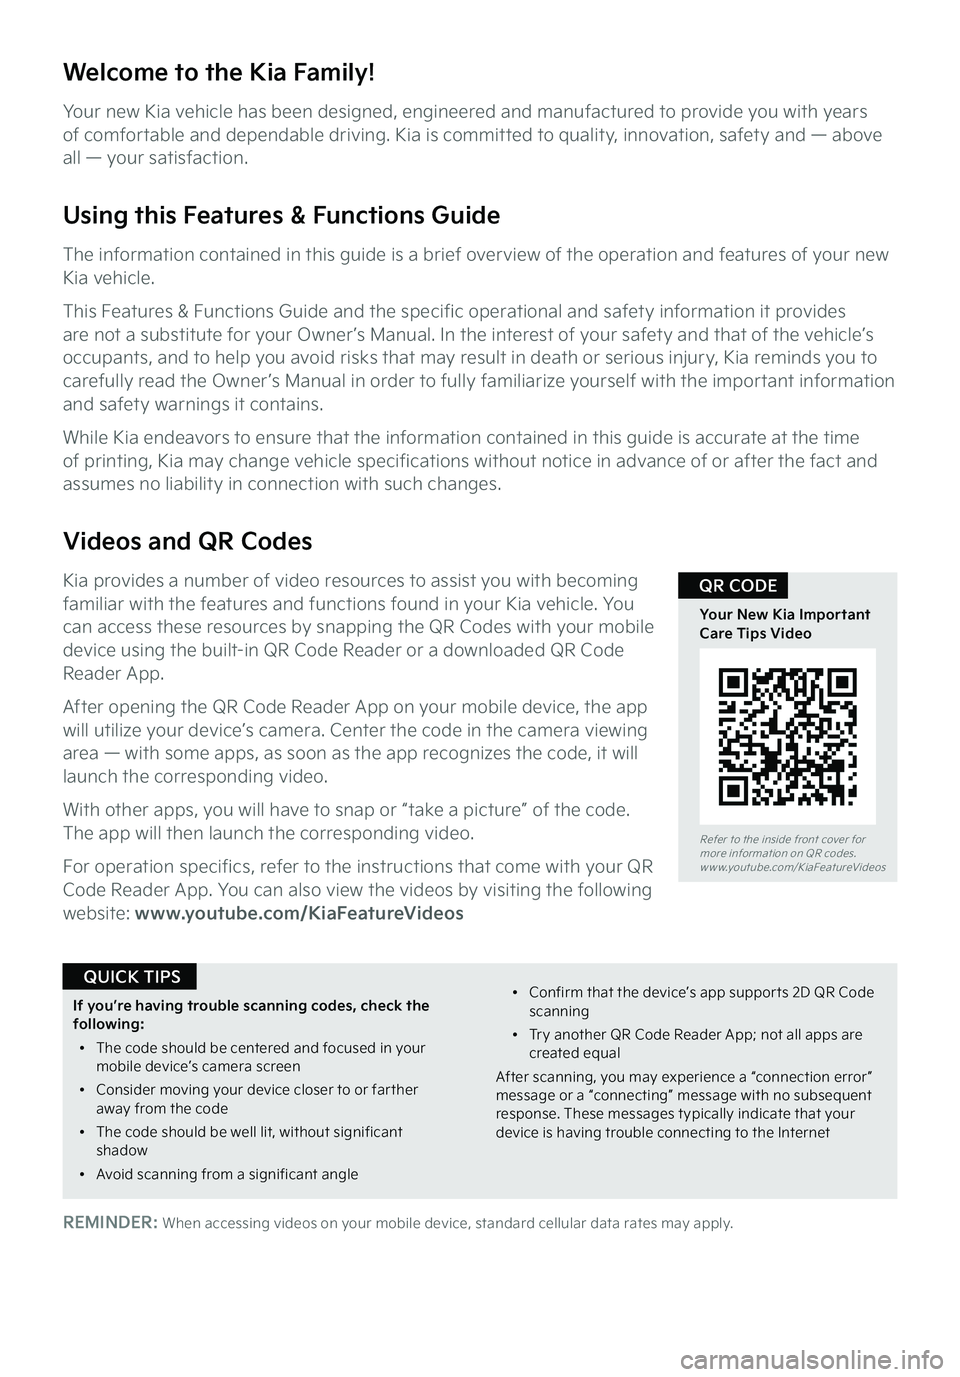 KIA STINGER 2023  Features and Functions Guide Refer to the inside front cover for  more information on QR codes.www.youtube.com/KiaFeatureVideos
Your New Kia Important Care Tips Video
QR CODE
Welcome to the Kia Family!
Your new Kia vehicle has be